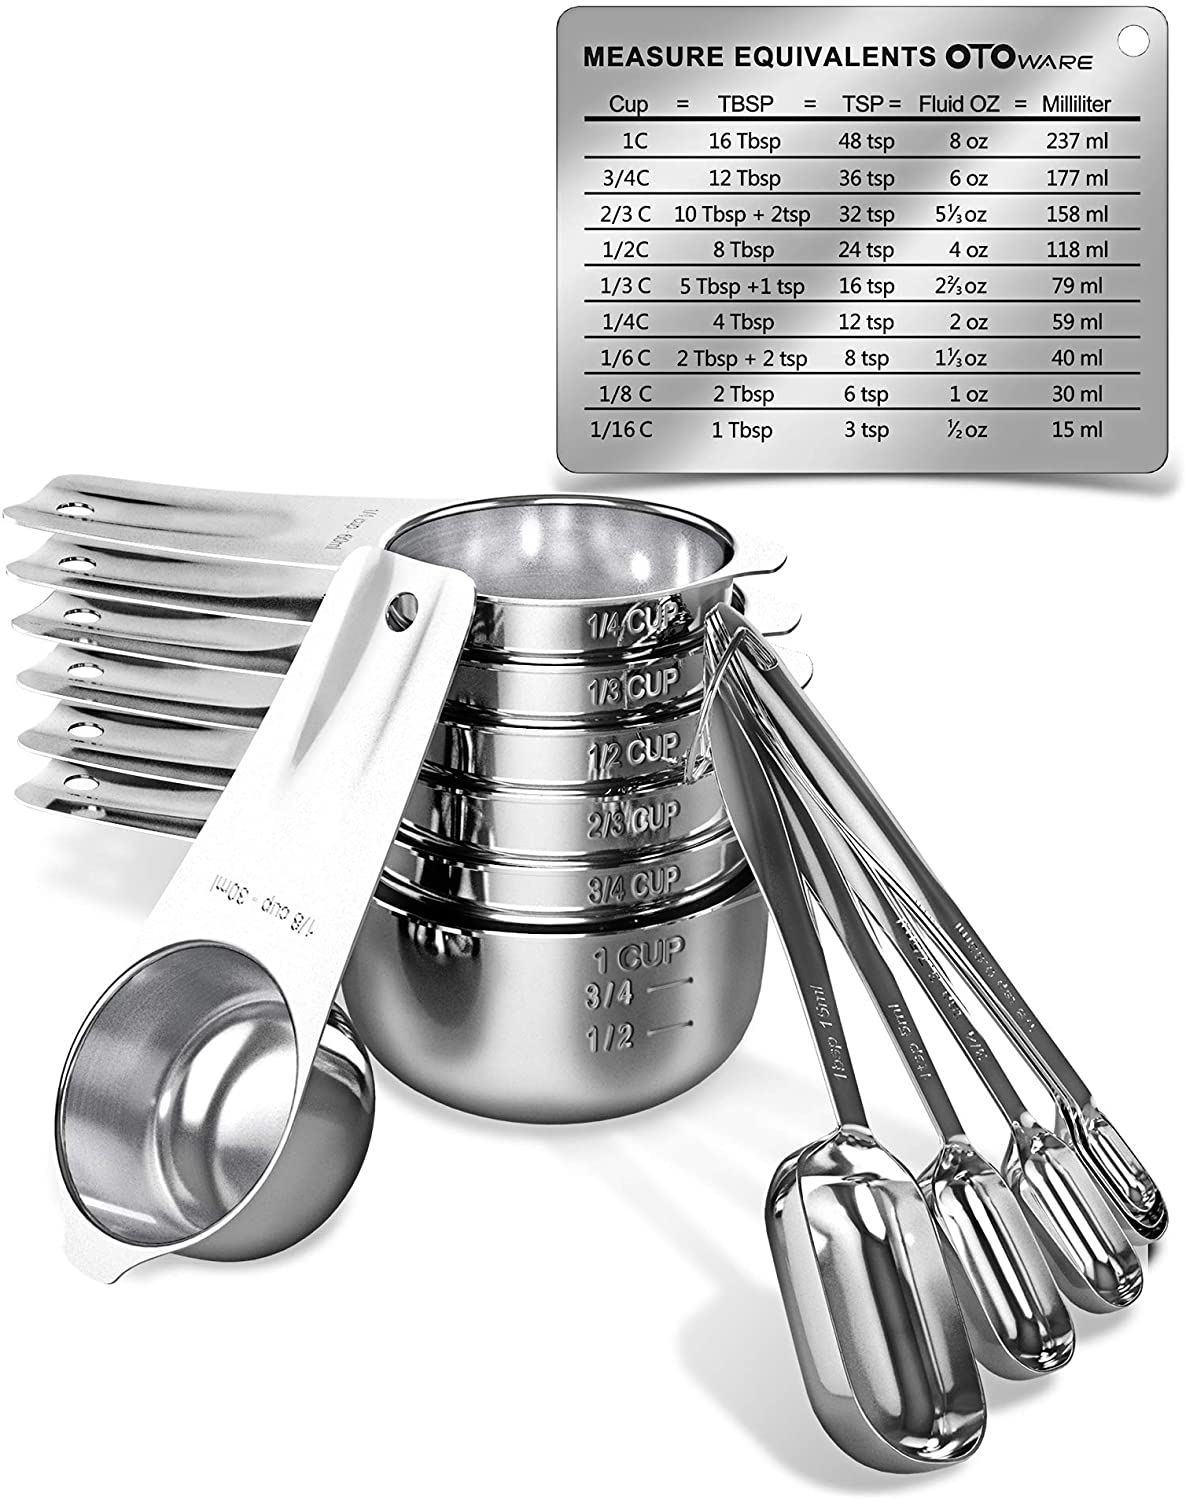 10. MaLife Measuring Cups and Spoons Set